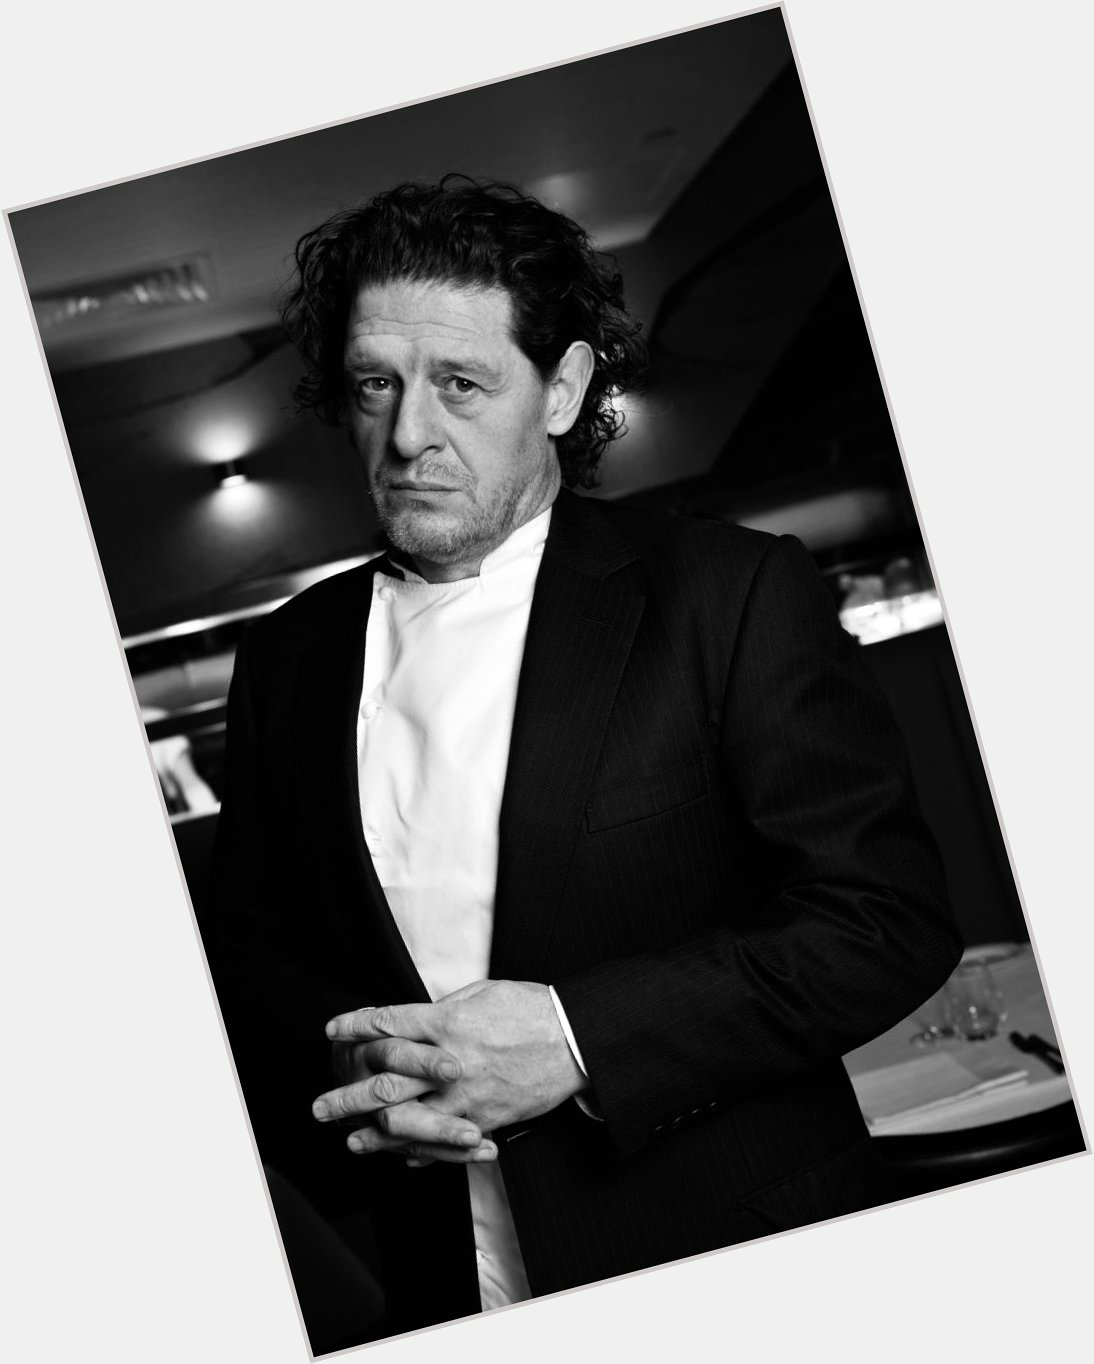 A MASSIVE  HAPPY BIRTHDAY TO THE ORIGINAL KITCHEN REBEL & ABSOLUTE DON THAT IS MARCO PIERRE WHITE 